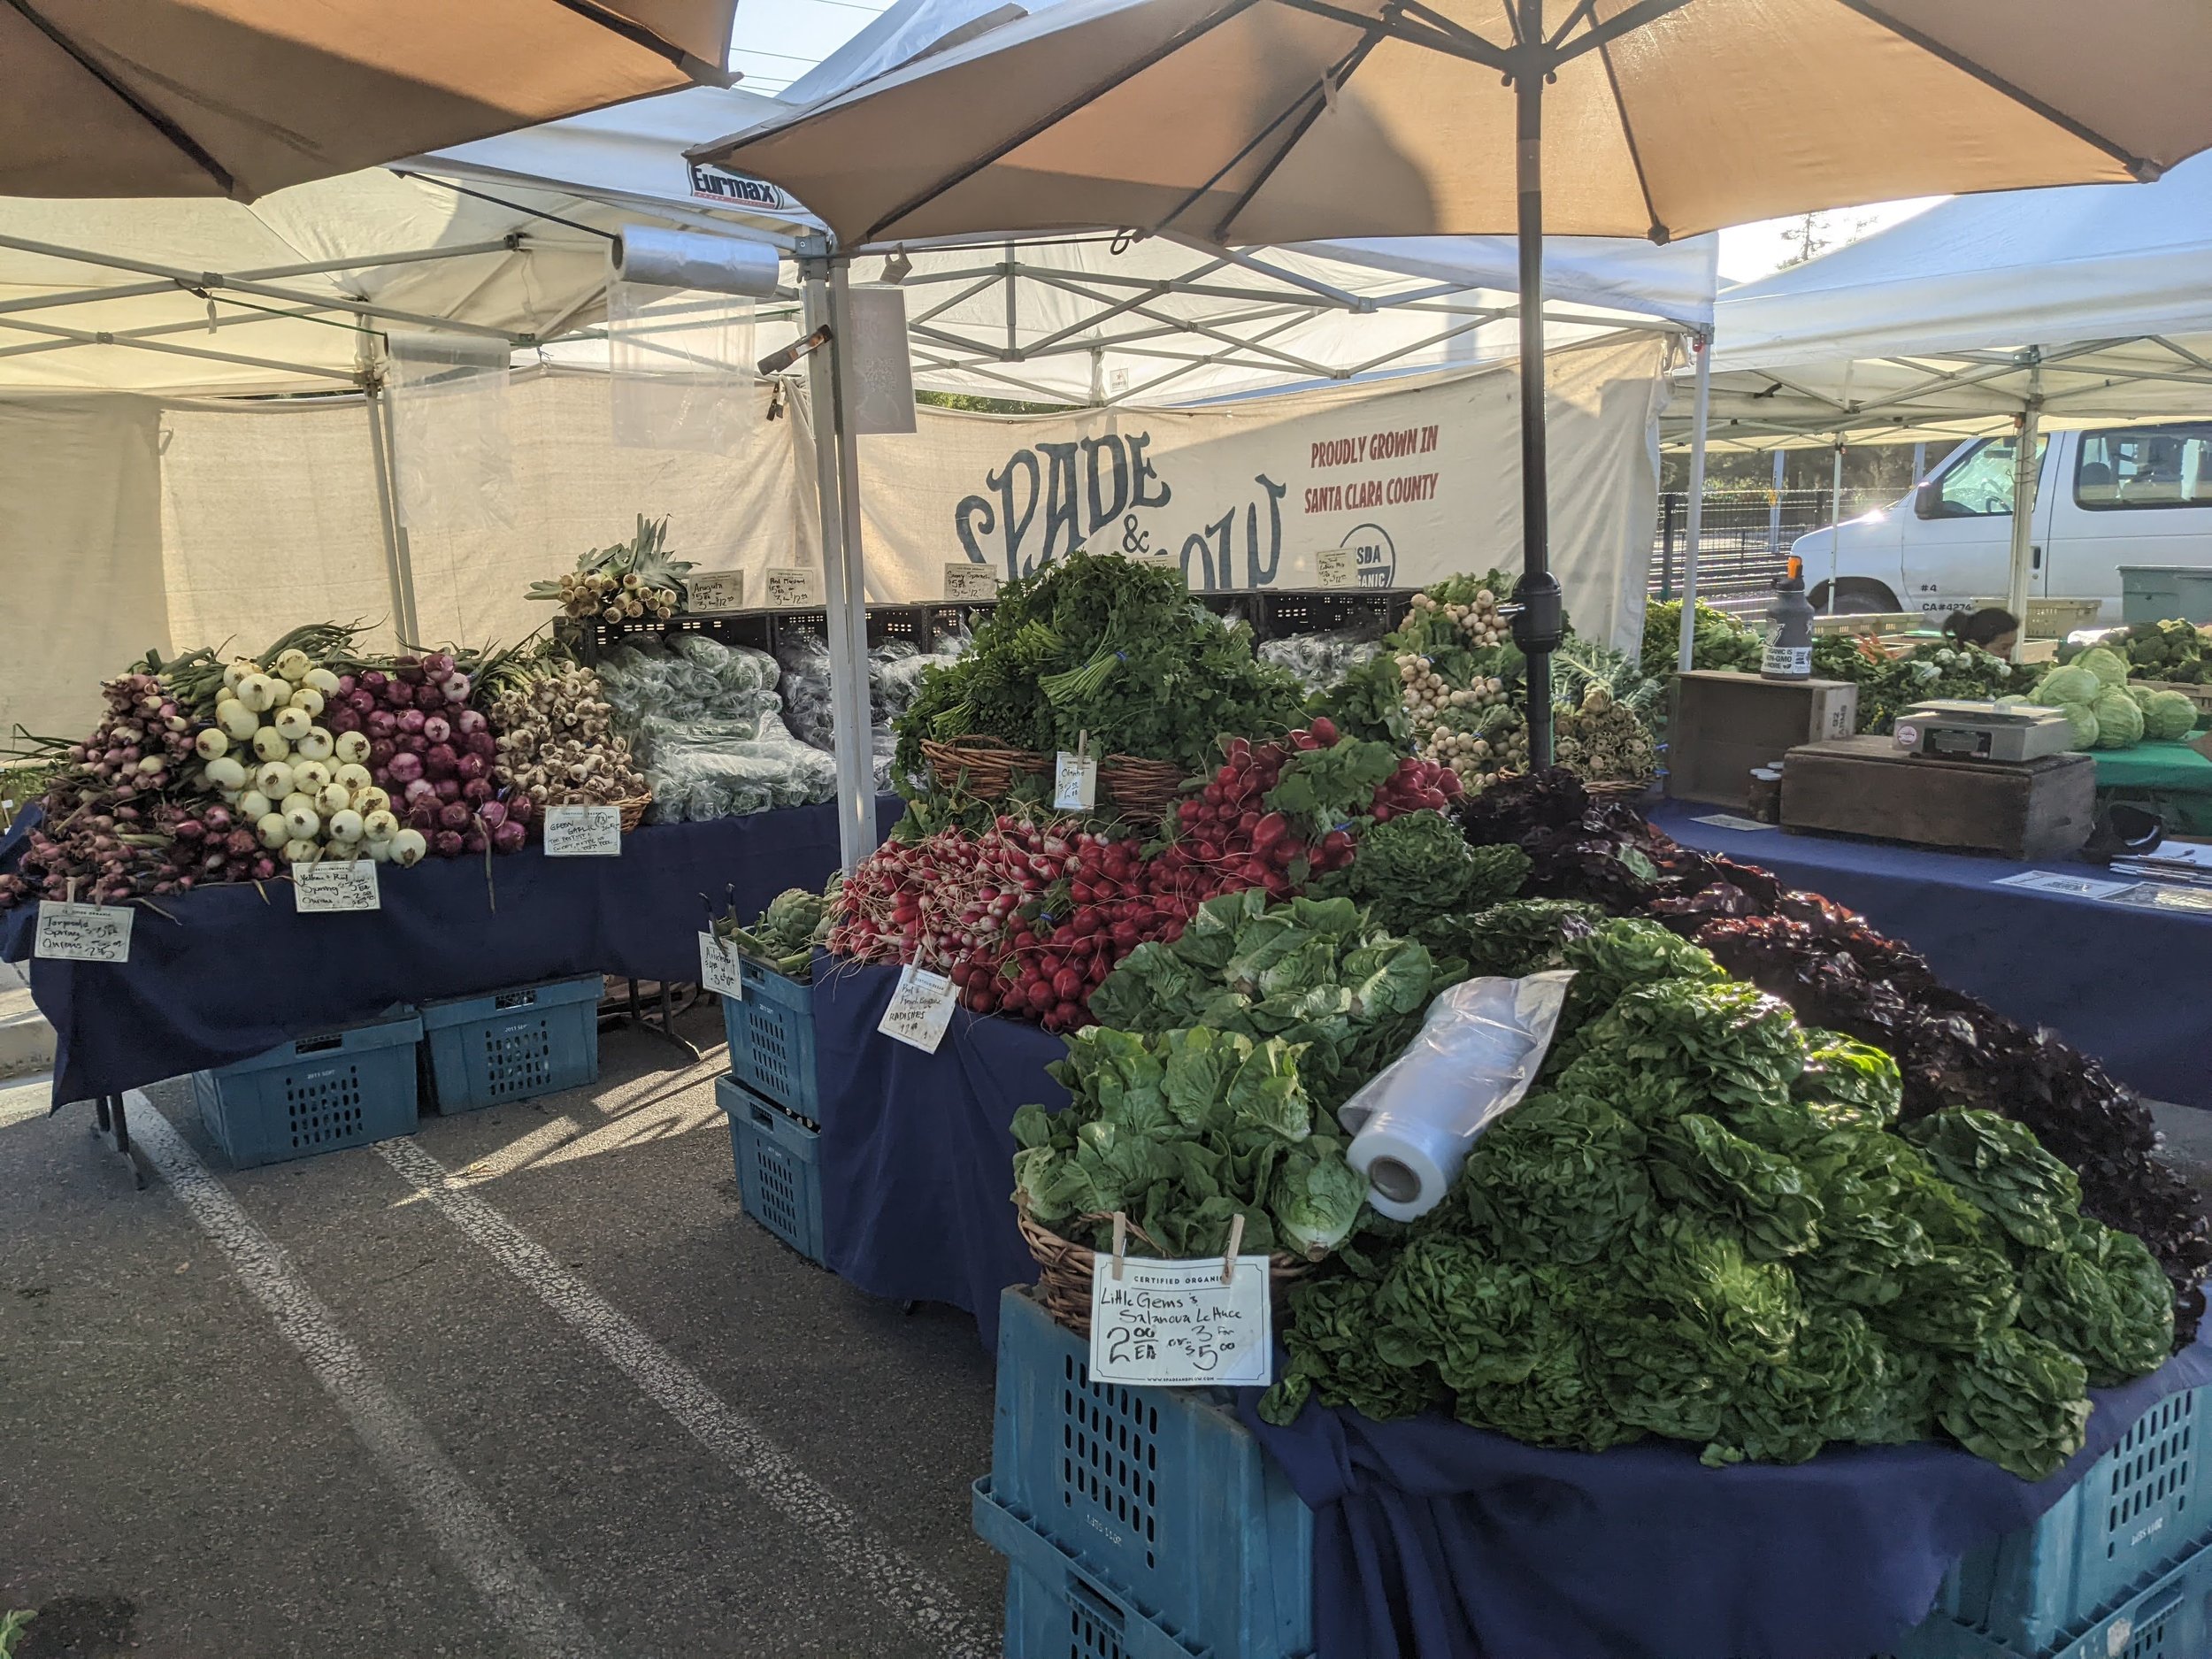 Farmers Markets in spring's full embrace